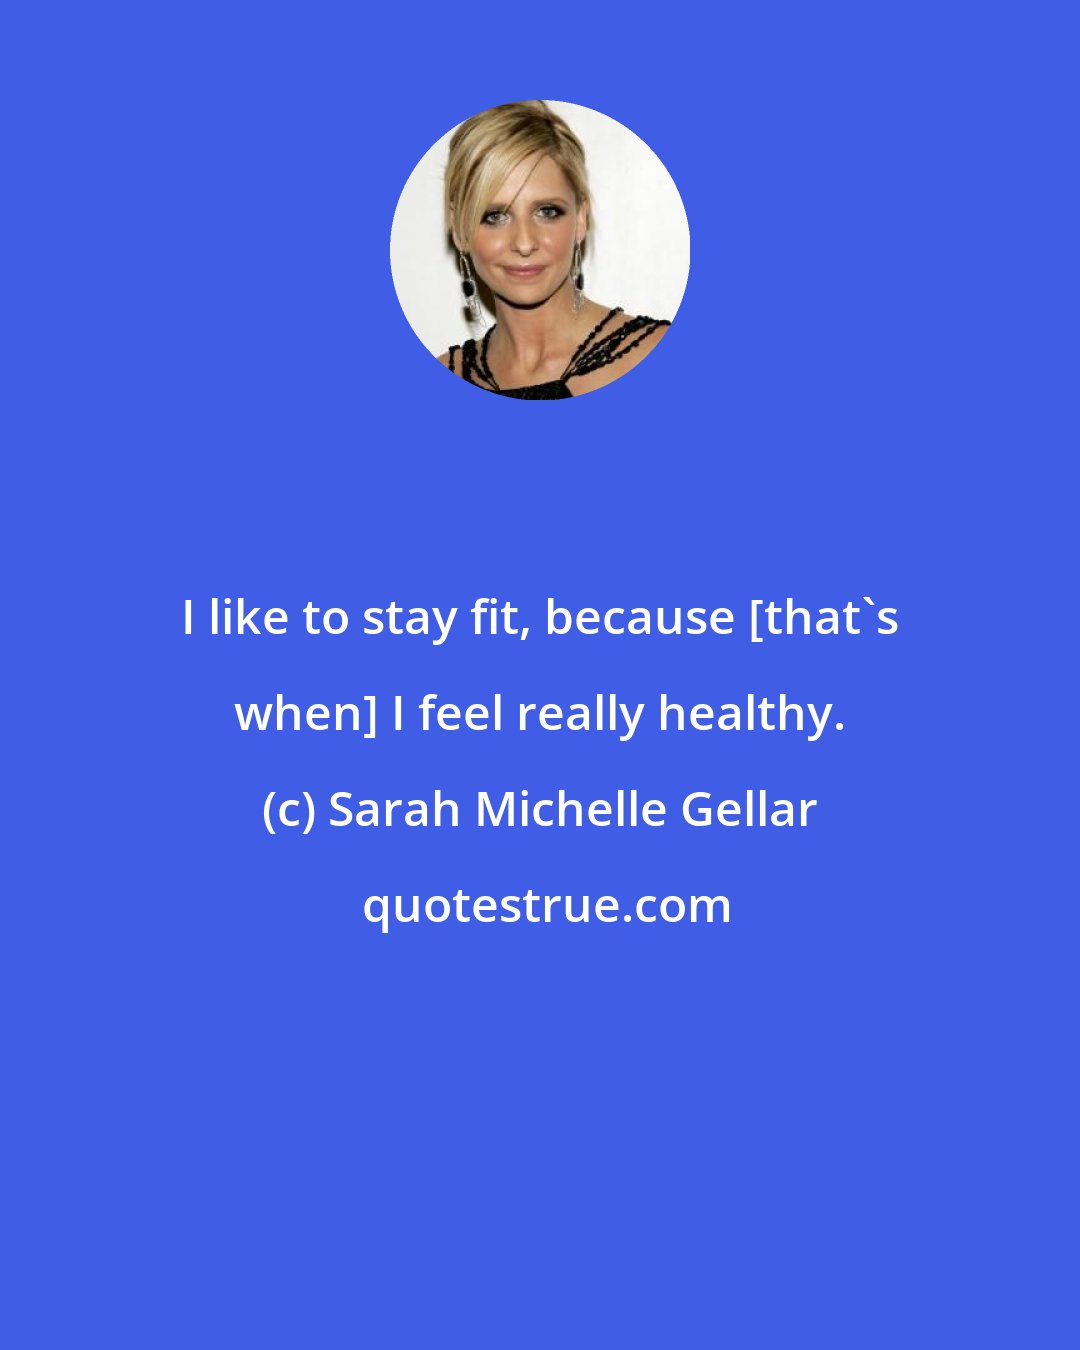 Sarah Michelle Gellar: I like to stay fit, because [that's when] I feel really healthy.